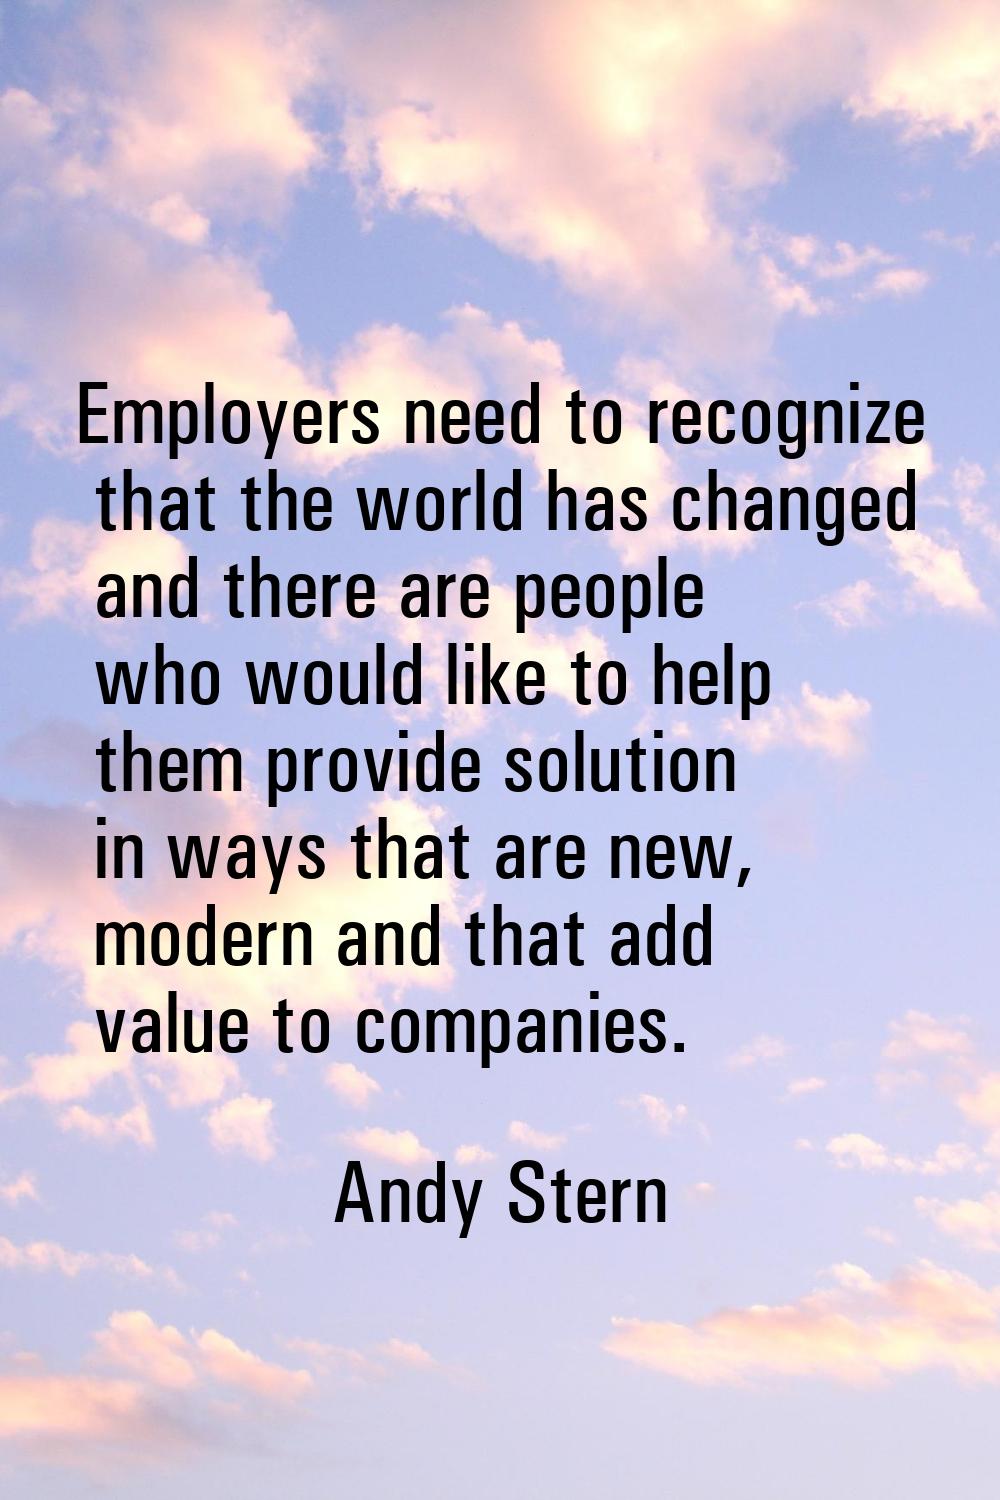 Employers need to recognize that the world has changed and there are people who would like to help 